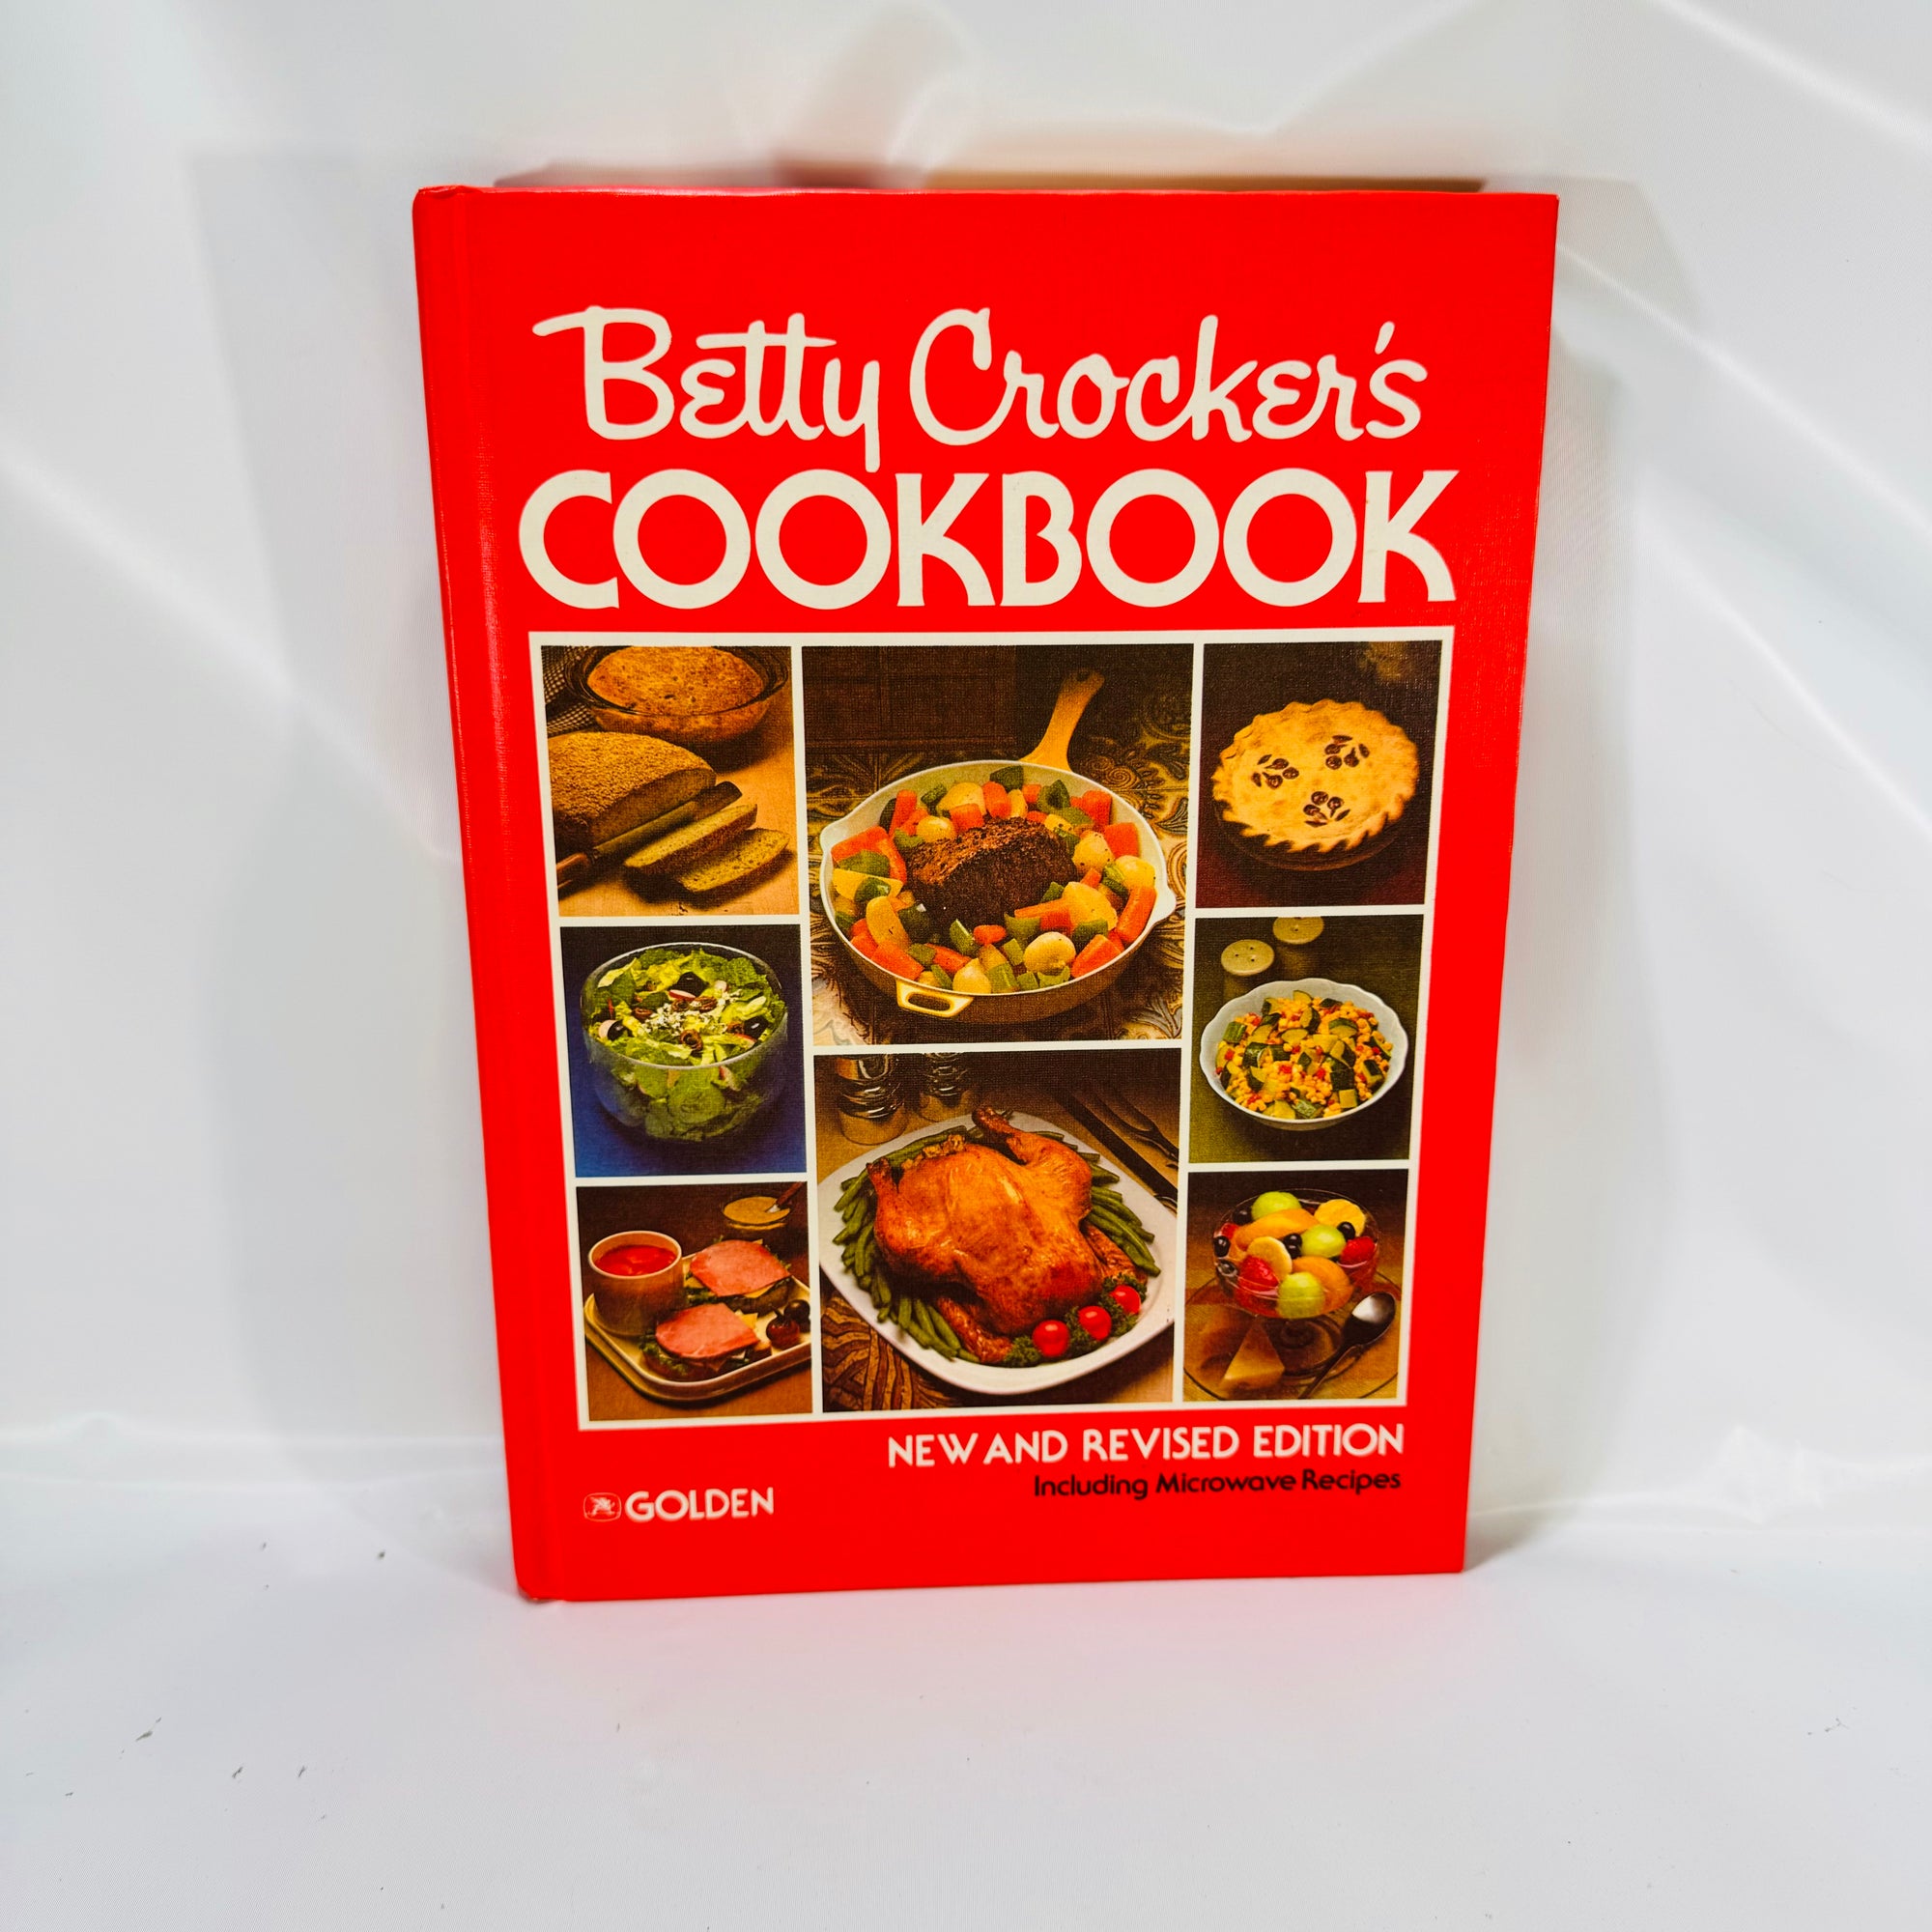 Betty Crocker Cookbook New and Revised Edition including Microwave 1981 Golden Vintage Recipes Collectable Cooking